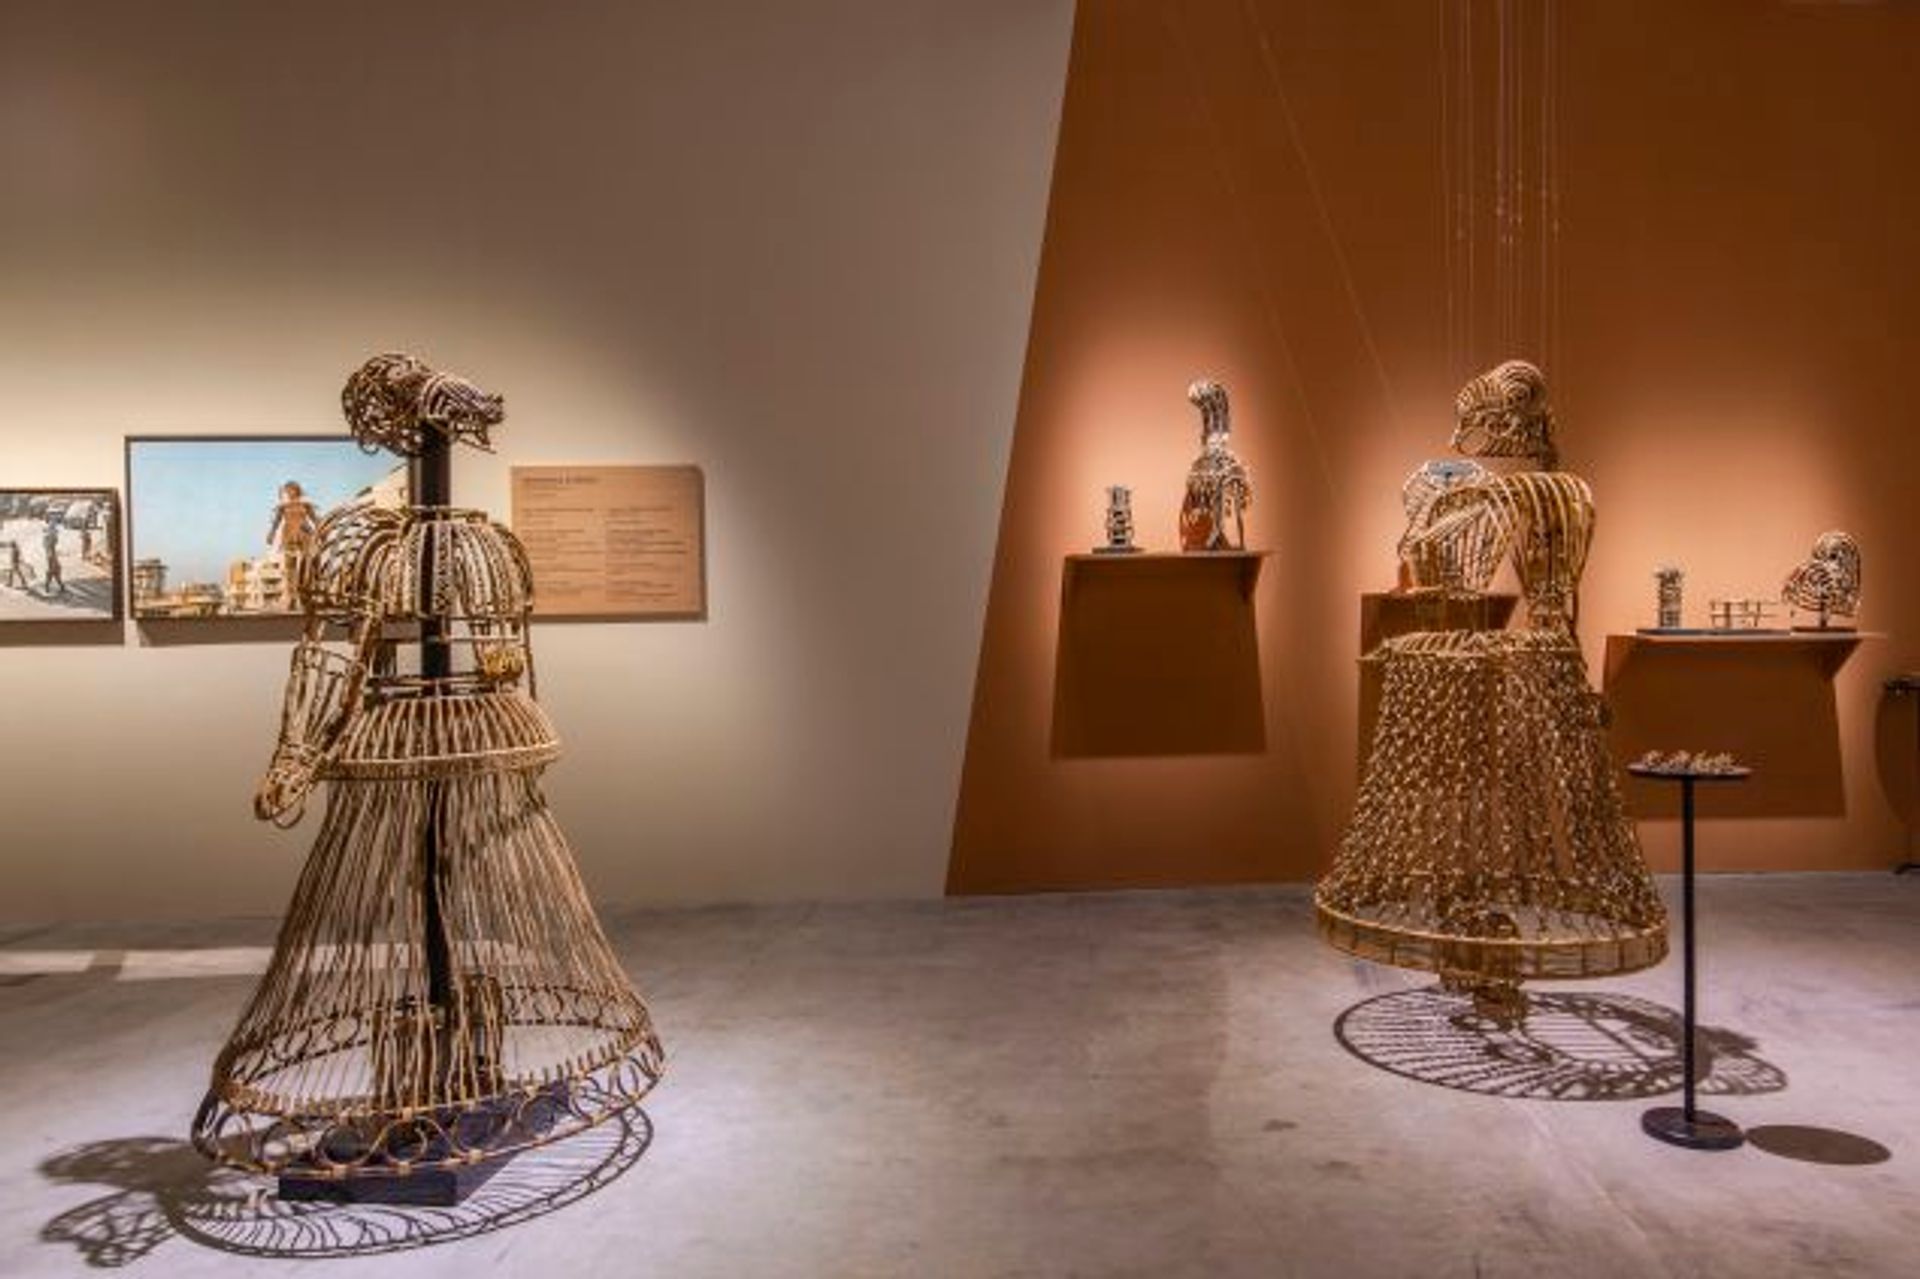 Shakuntala Kulkarni’s Of Bodies, Armour and Cages (2010–2012) was created for a 2012 exhibition of the same title at the Kiran Nadar Museum of Art in New Delhi, and is now on view at India’s 2019 Venice Biennale Pavilion. Collection of Kiran Nadar Museum of Art, photo by Kiran Keshav